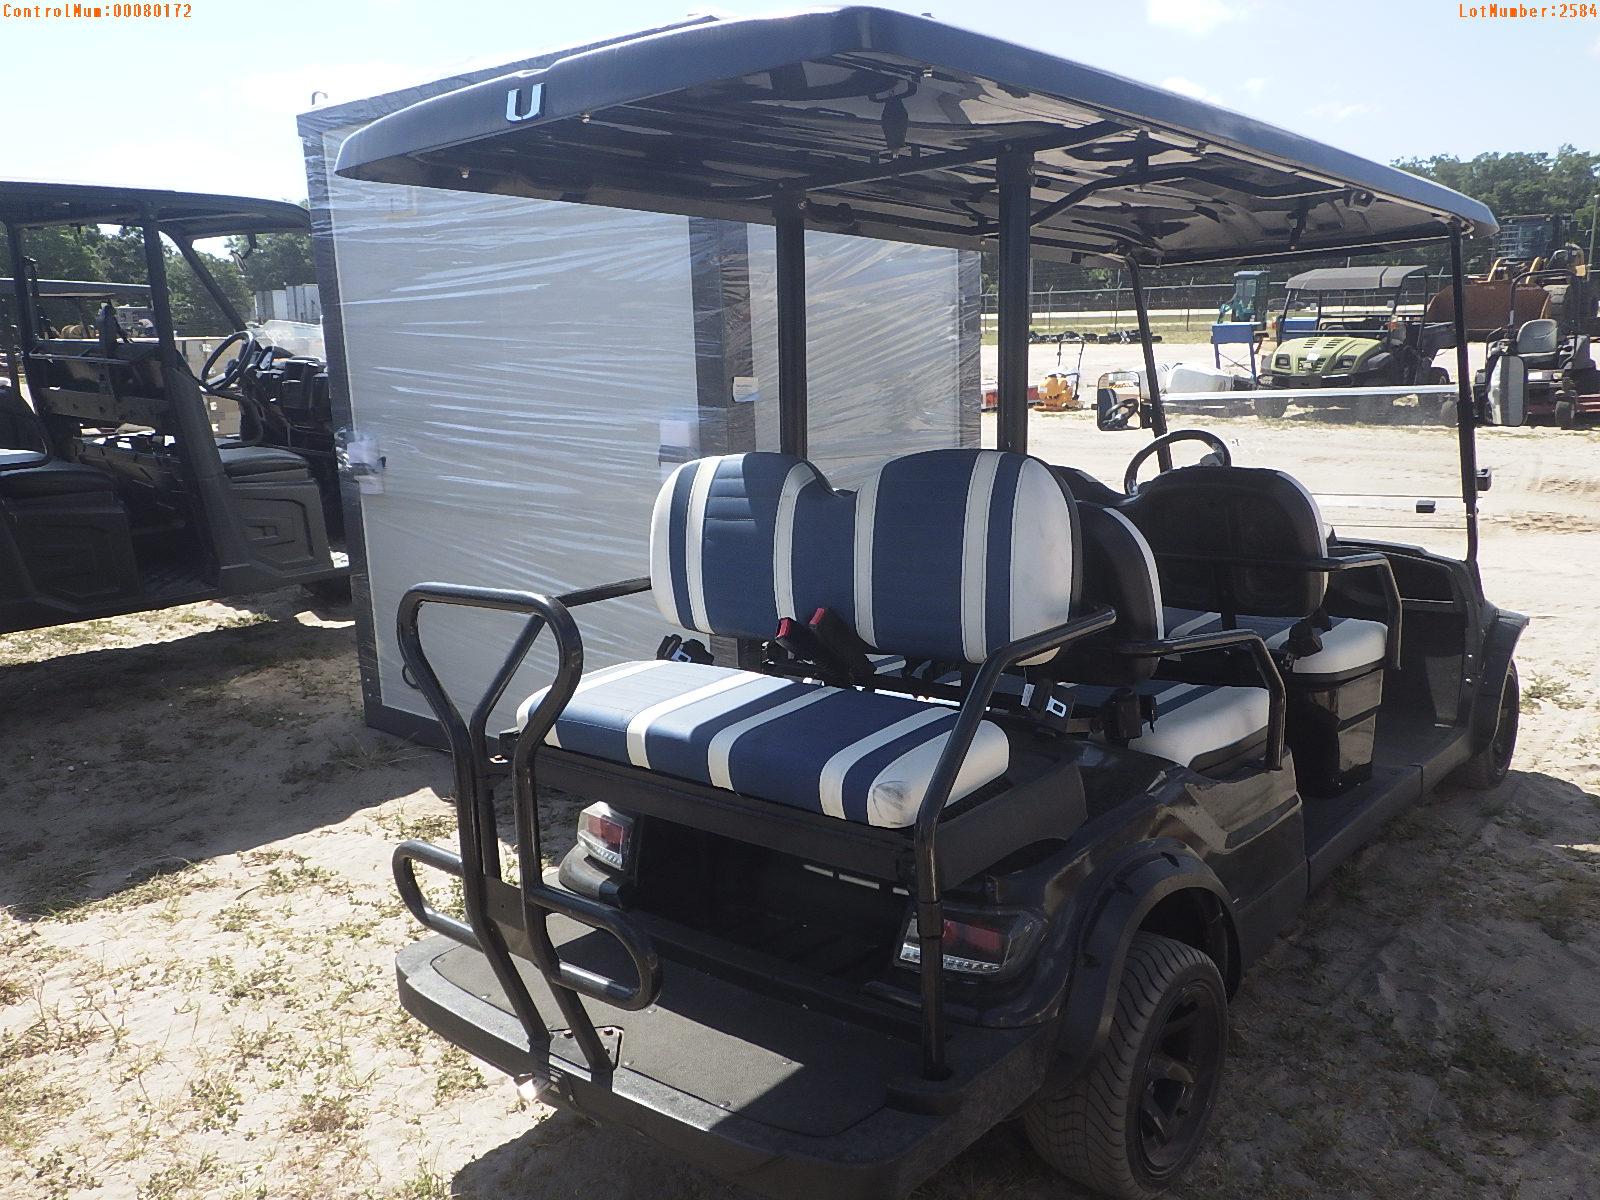 5-02584 (Equip.-Cart)  Seller:Private/Dealer ICON 160 SIDE BY SIDE SIX PASSENGER